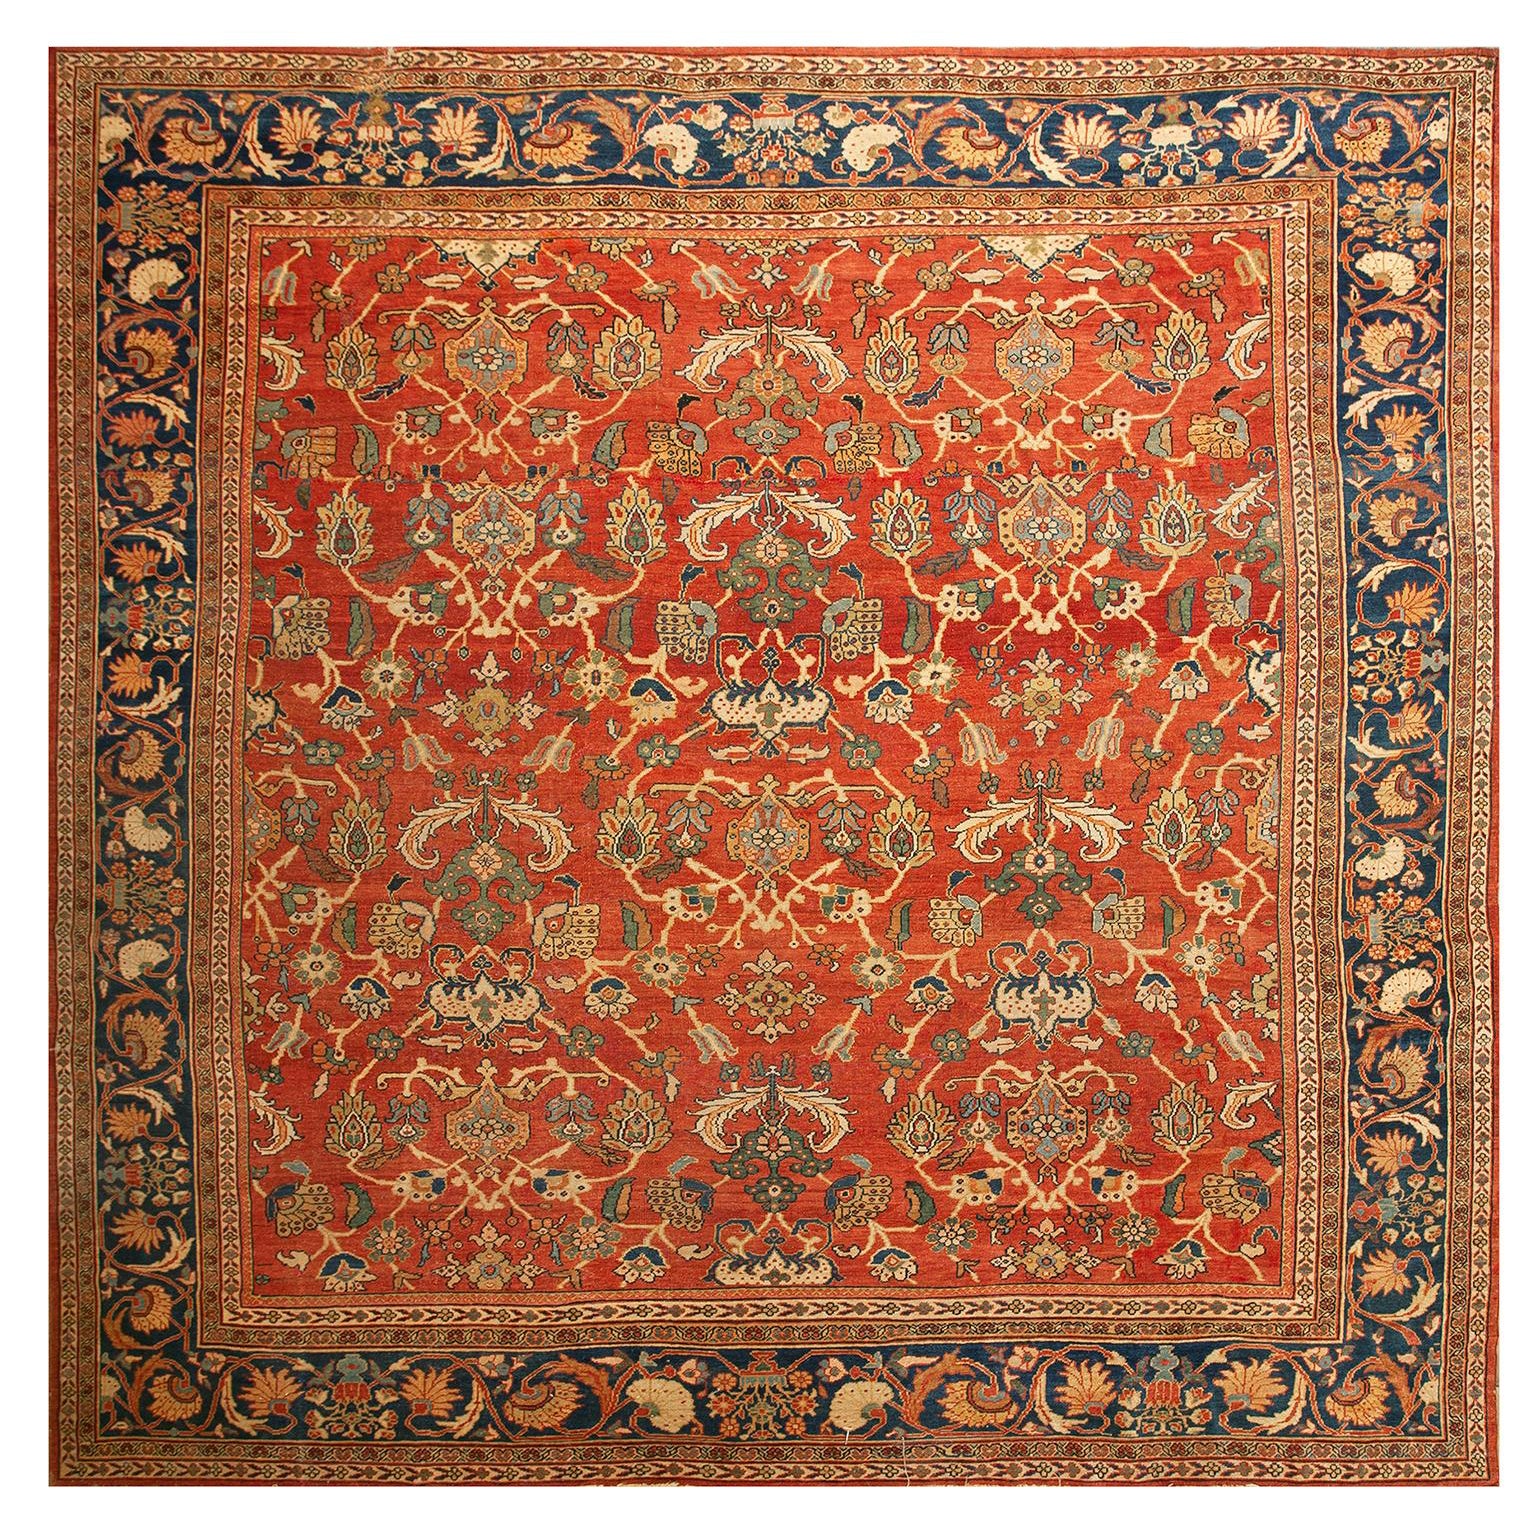 Early 20th Century Persian Sultanabad Carpet ( 11' 6'' x 12' - 350 x 365 )